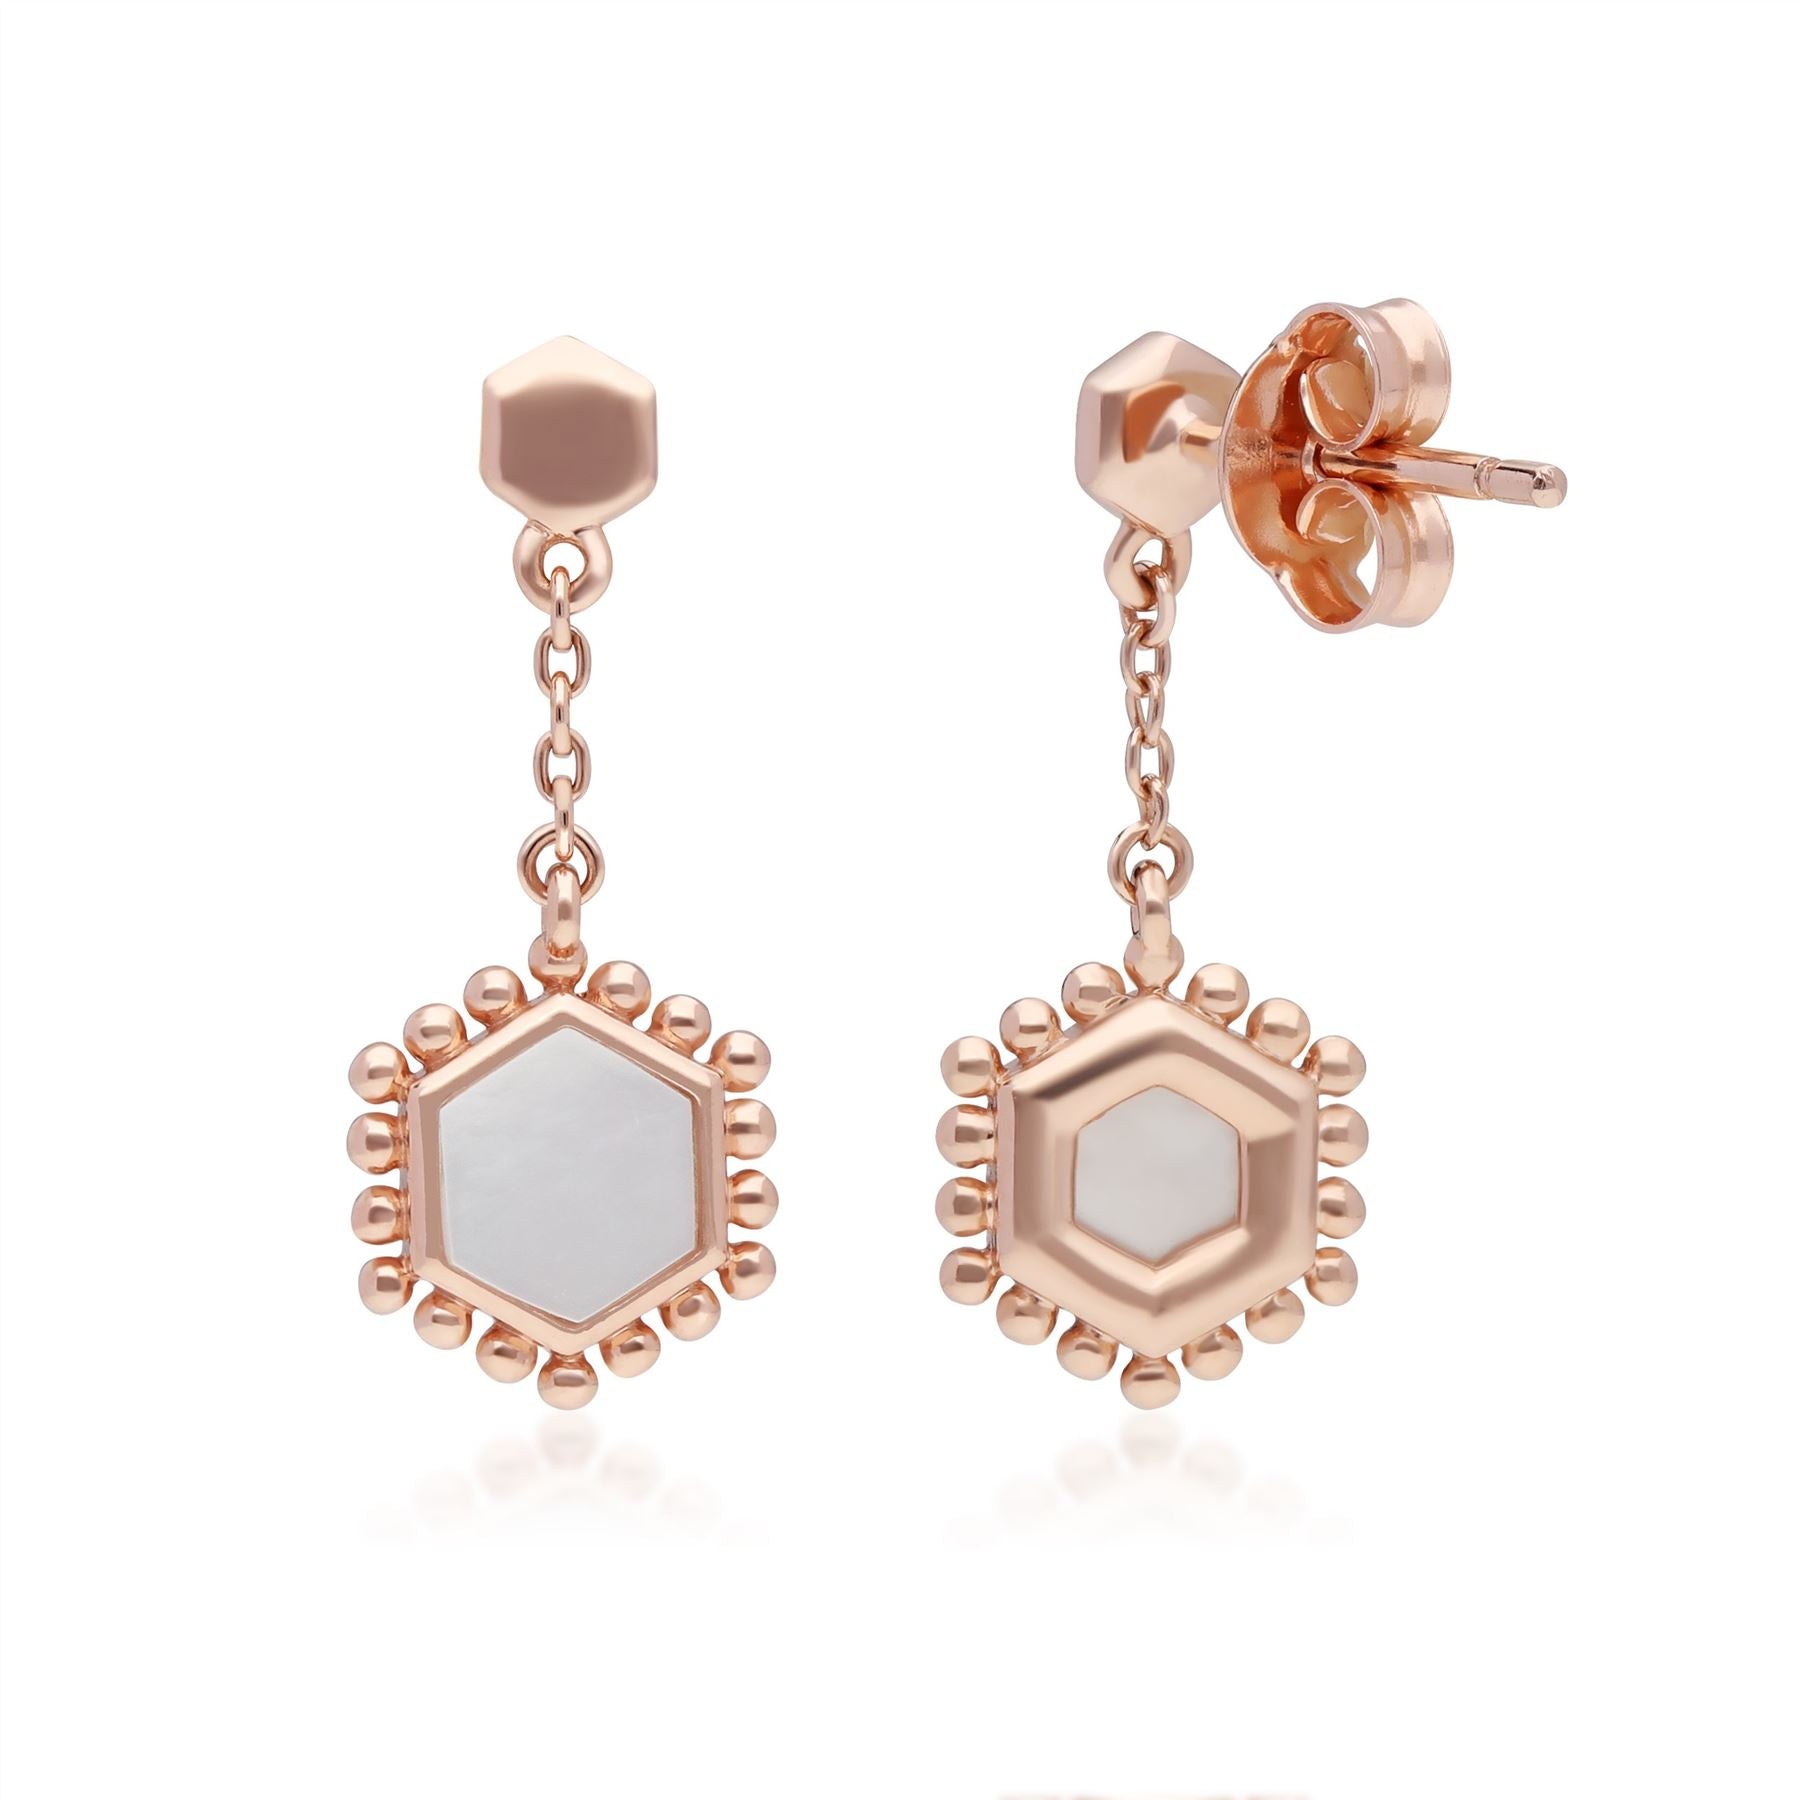 271E020604925 Mother of Pearl Slice Chain Drop Earrings in Rose Gold Plated Sterling Silver 4